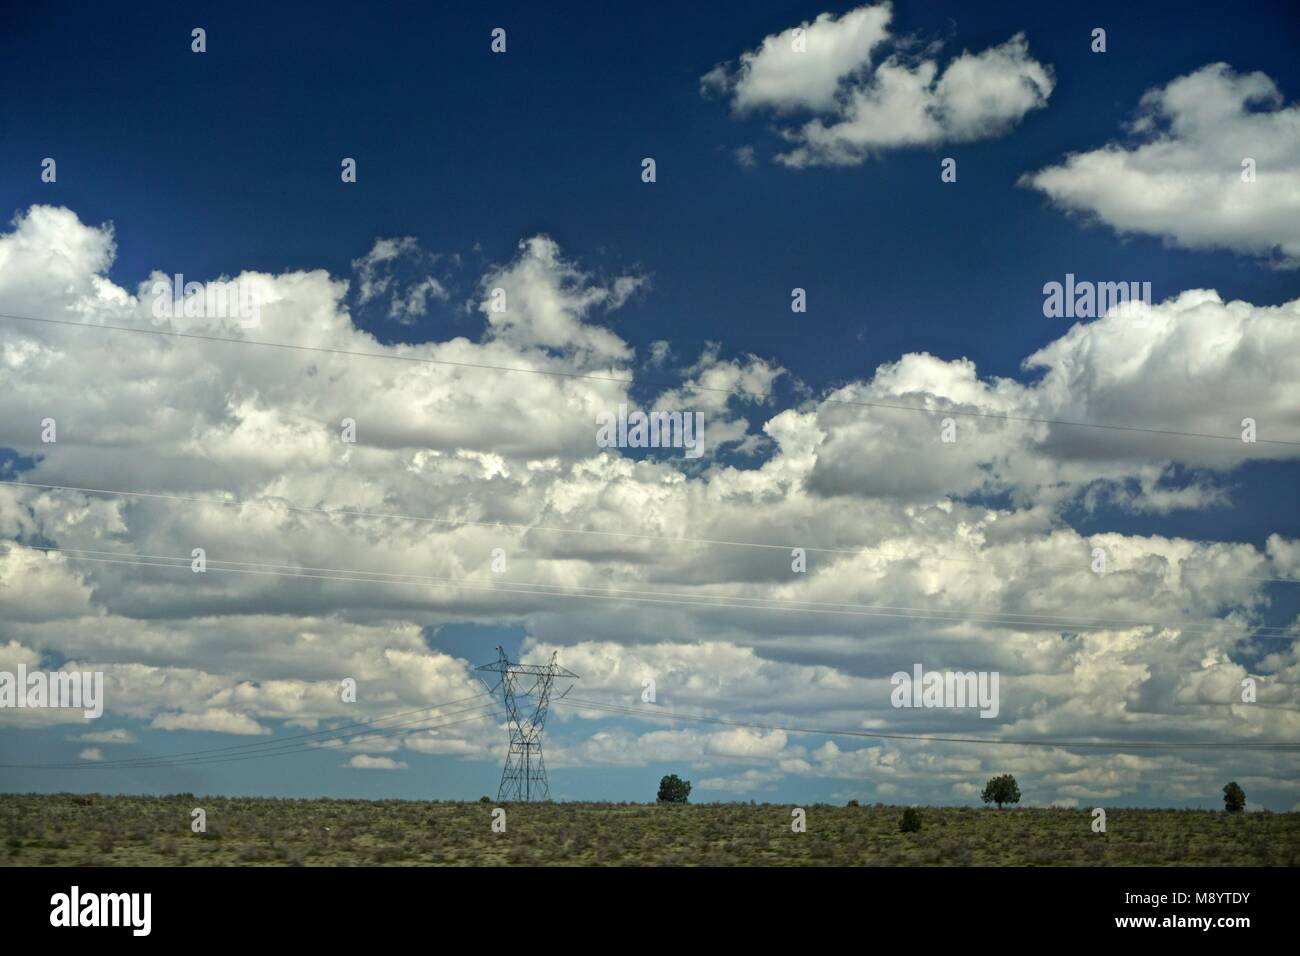 Coconino County, AZ, USA: Clouds in a deep blue sky over powerlines along State Highway 64 between the Grand Canyon and Williams, Arizona. Stock Photo